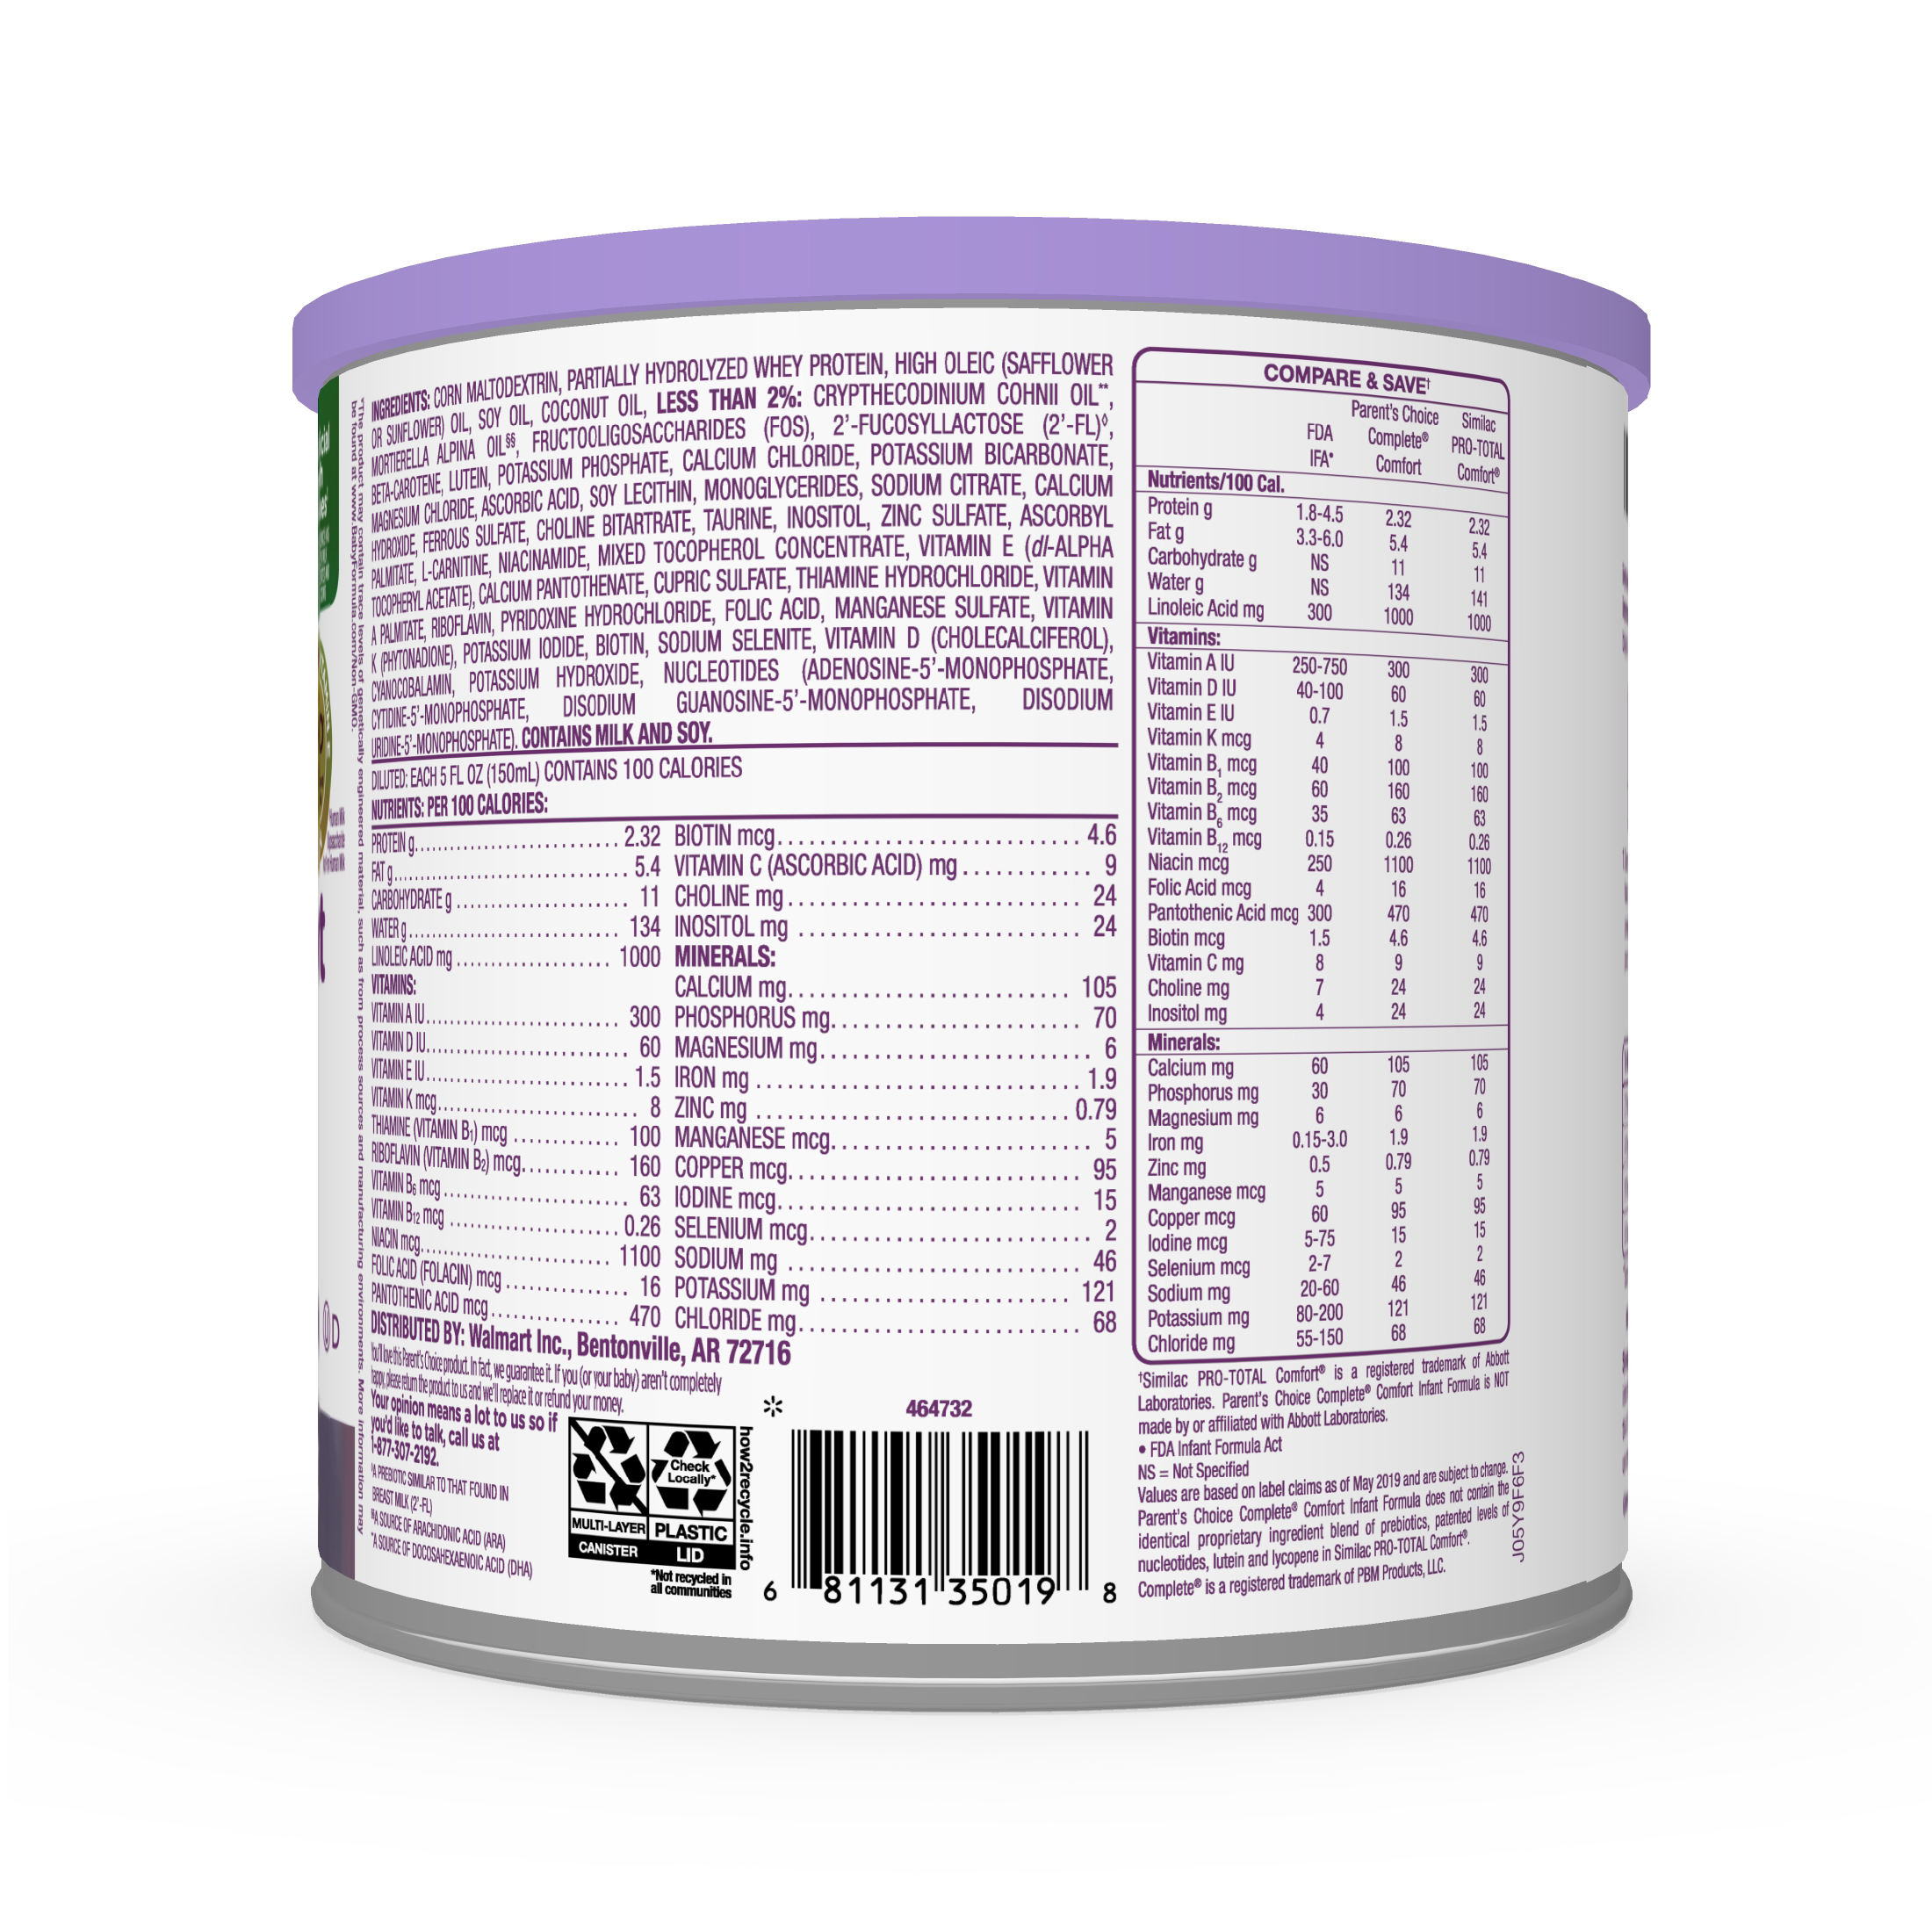 Parent's Choice Non-GMO Complete Comfort Infant Formula, 22.5 oz Canister - image 3 of 13